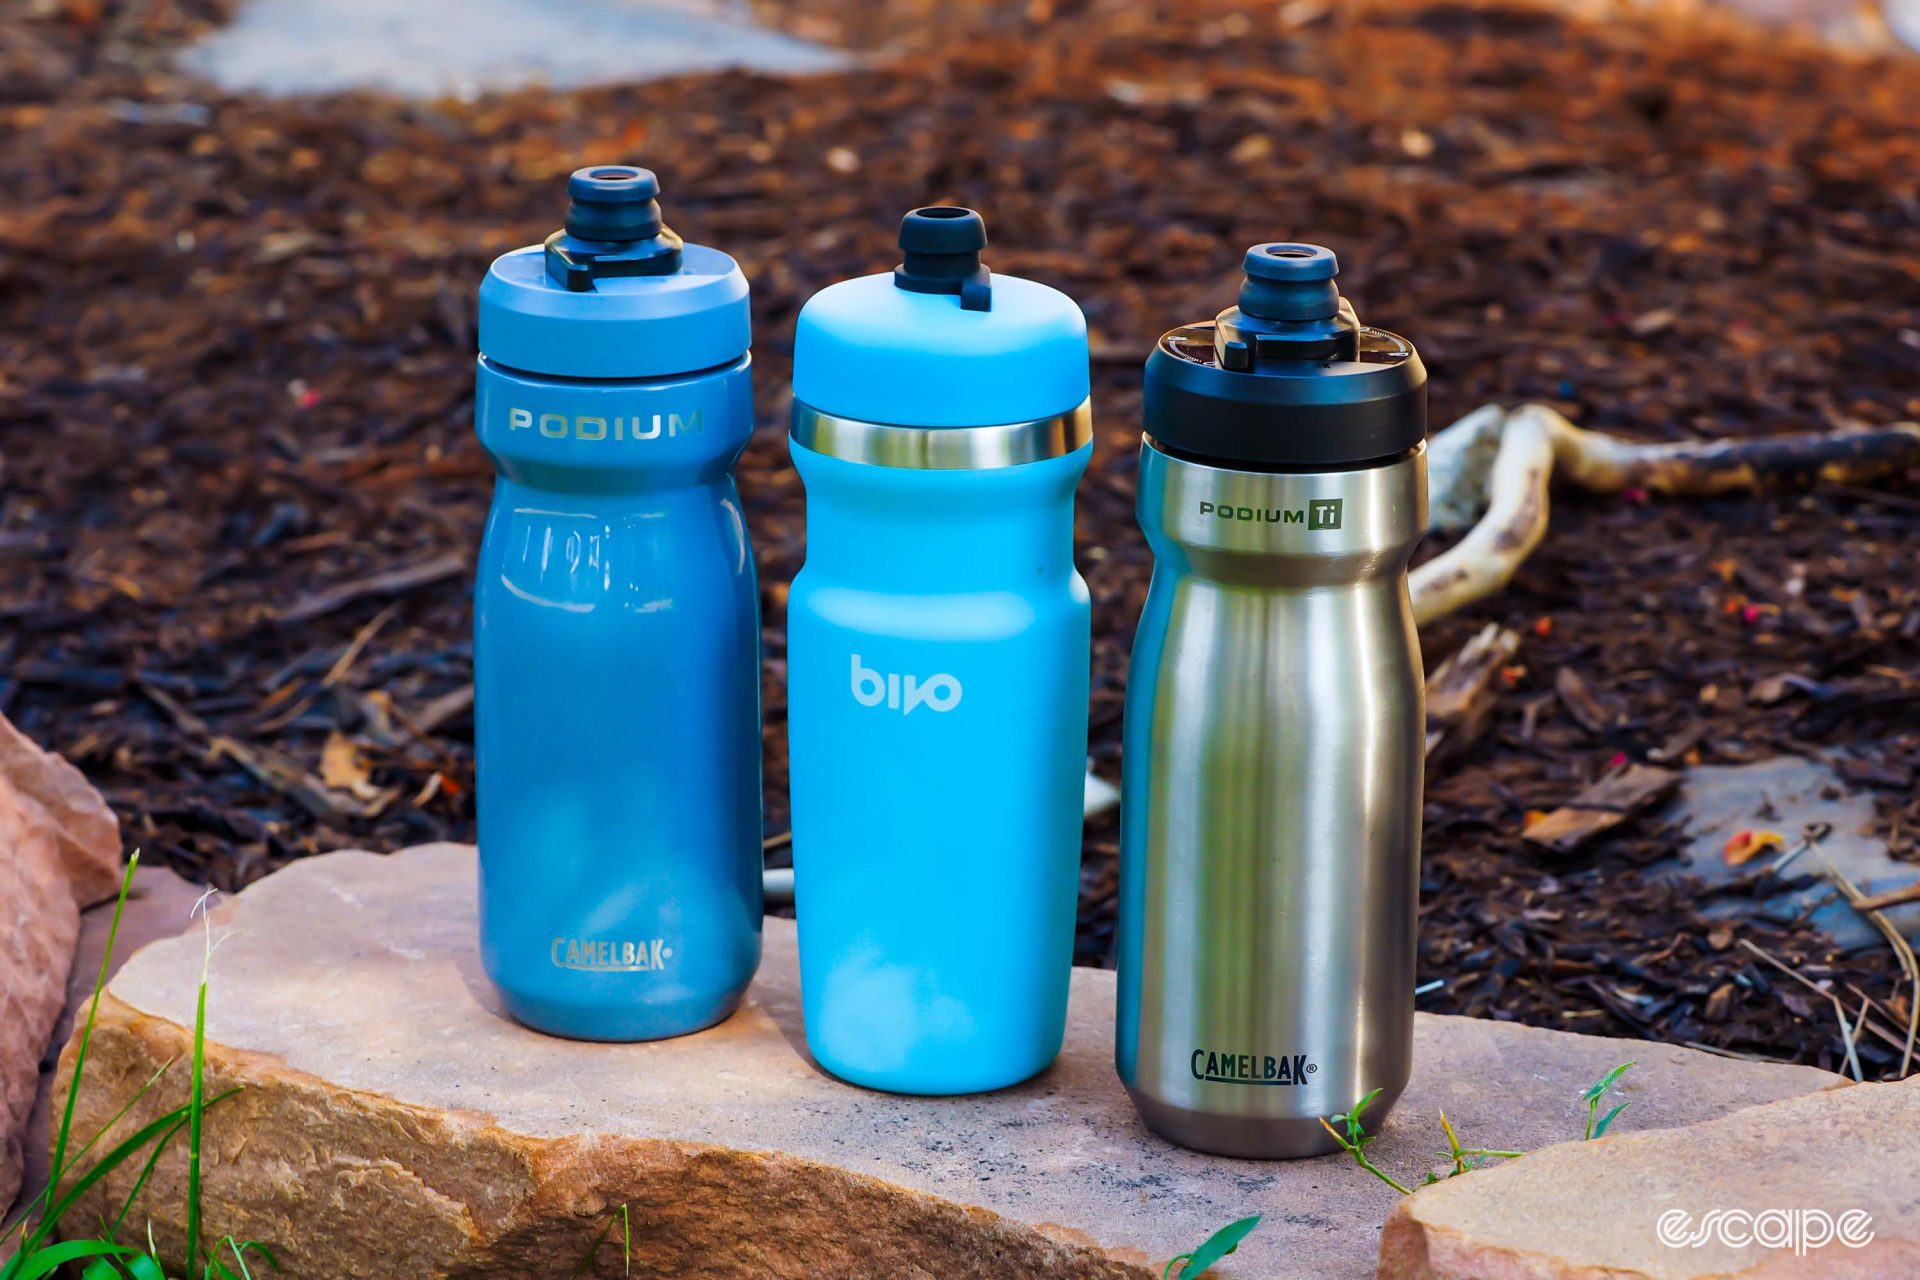 CamelBak Podium stainless steel and titanium insulated bottles, and Bivo Trio insulated bottle